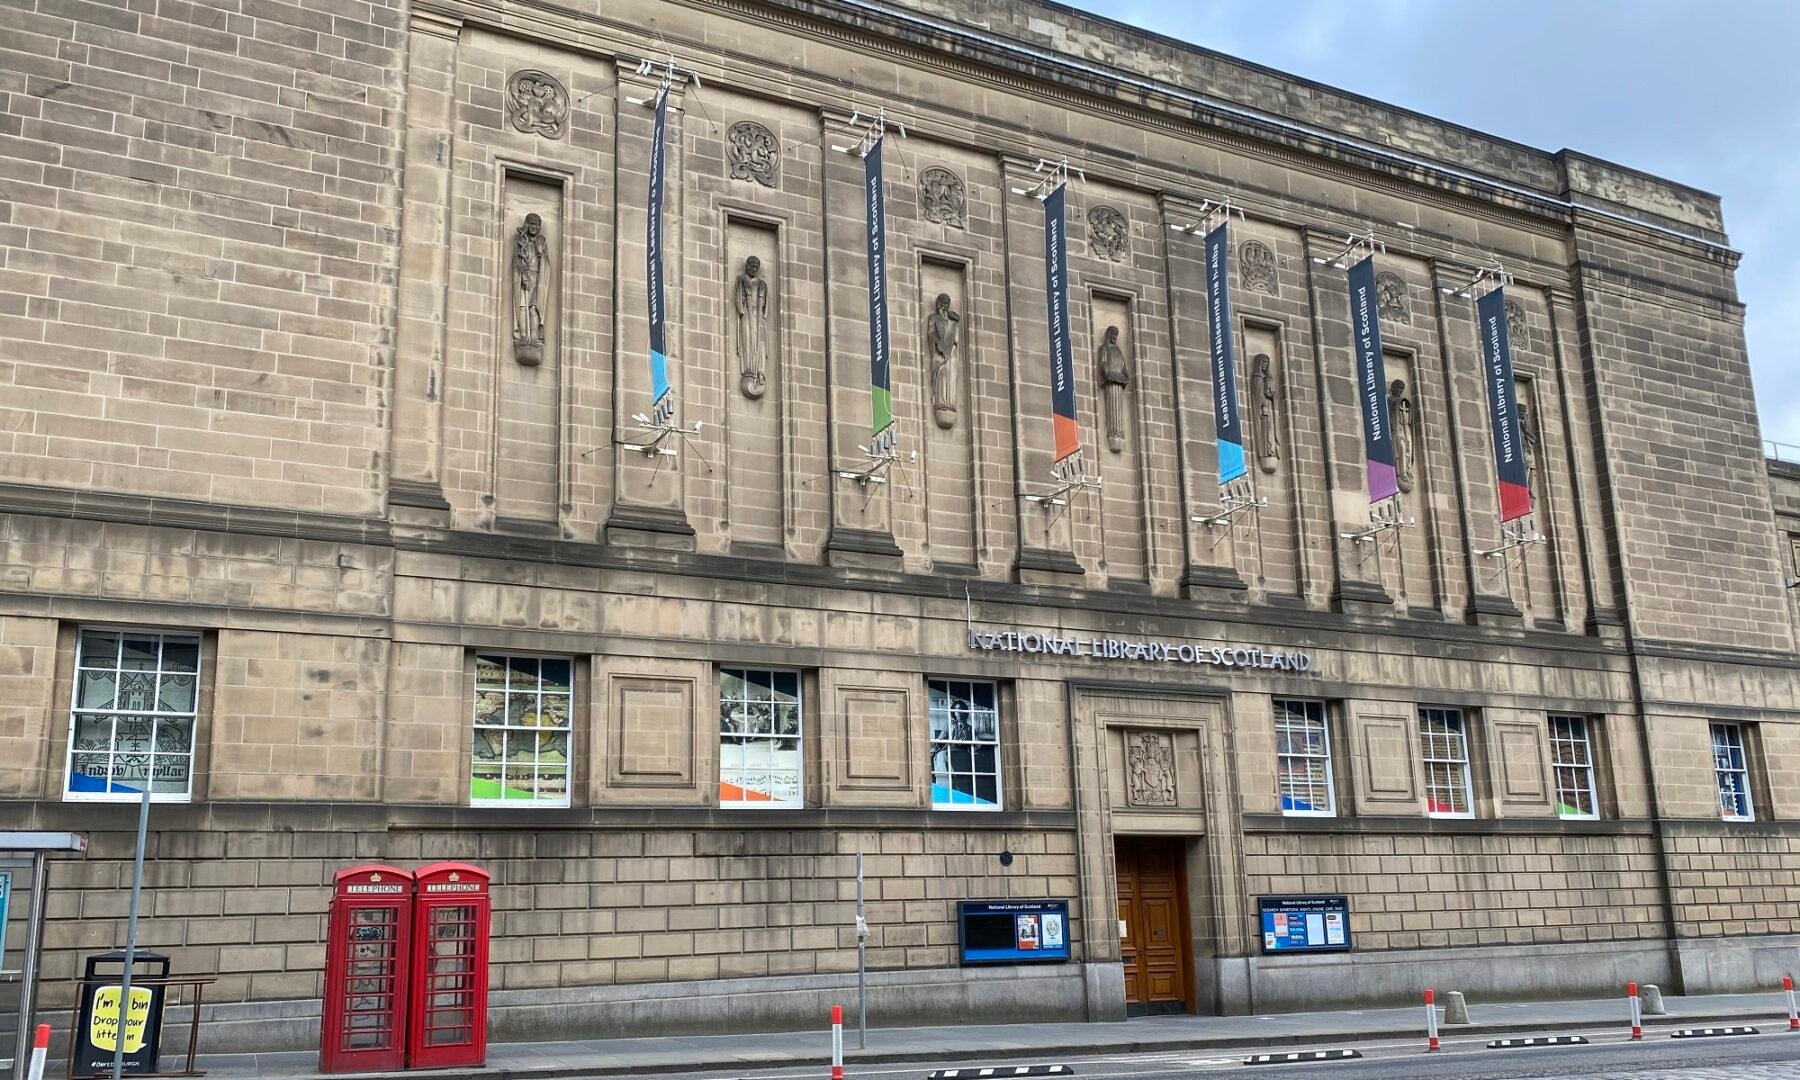 Exterior of the National Library of Scotland